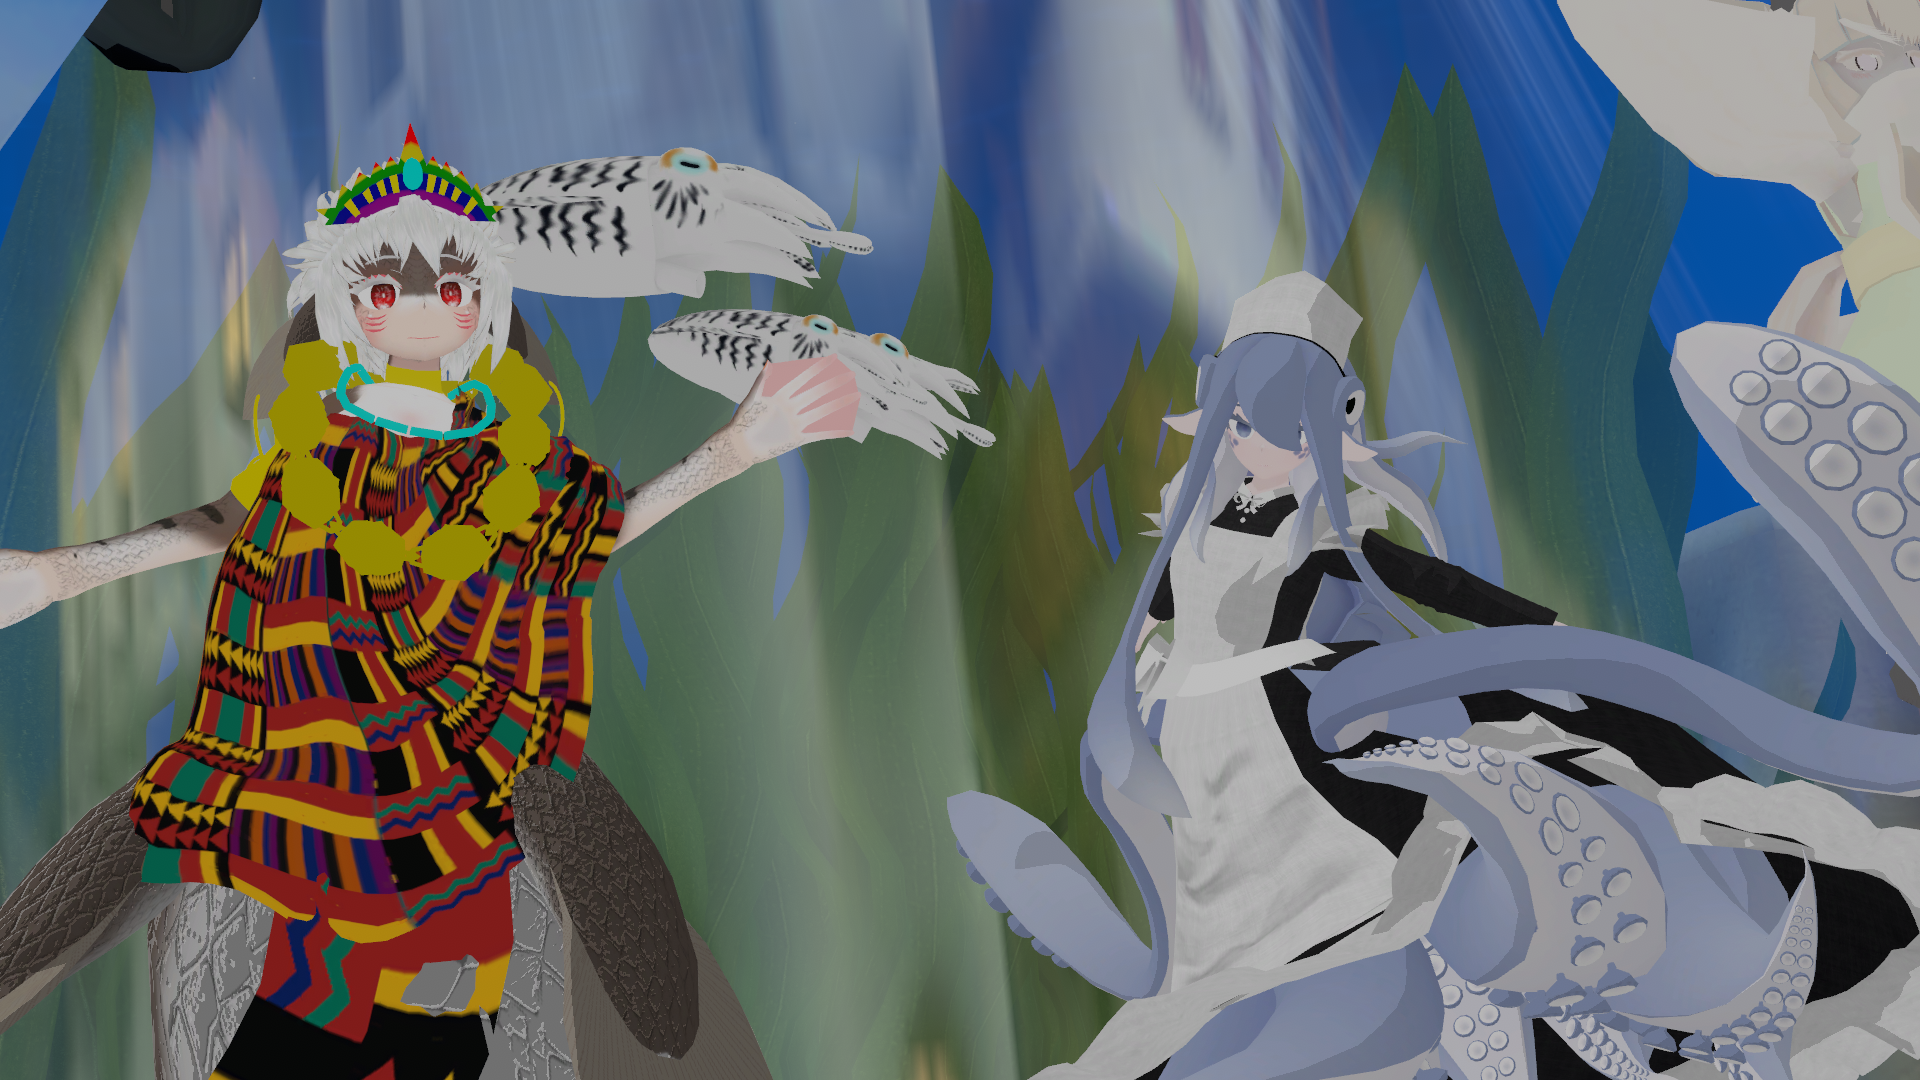 VRChat_1920x1080_2021-12-05_03-52-30.929.png